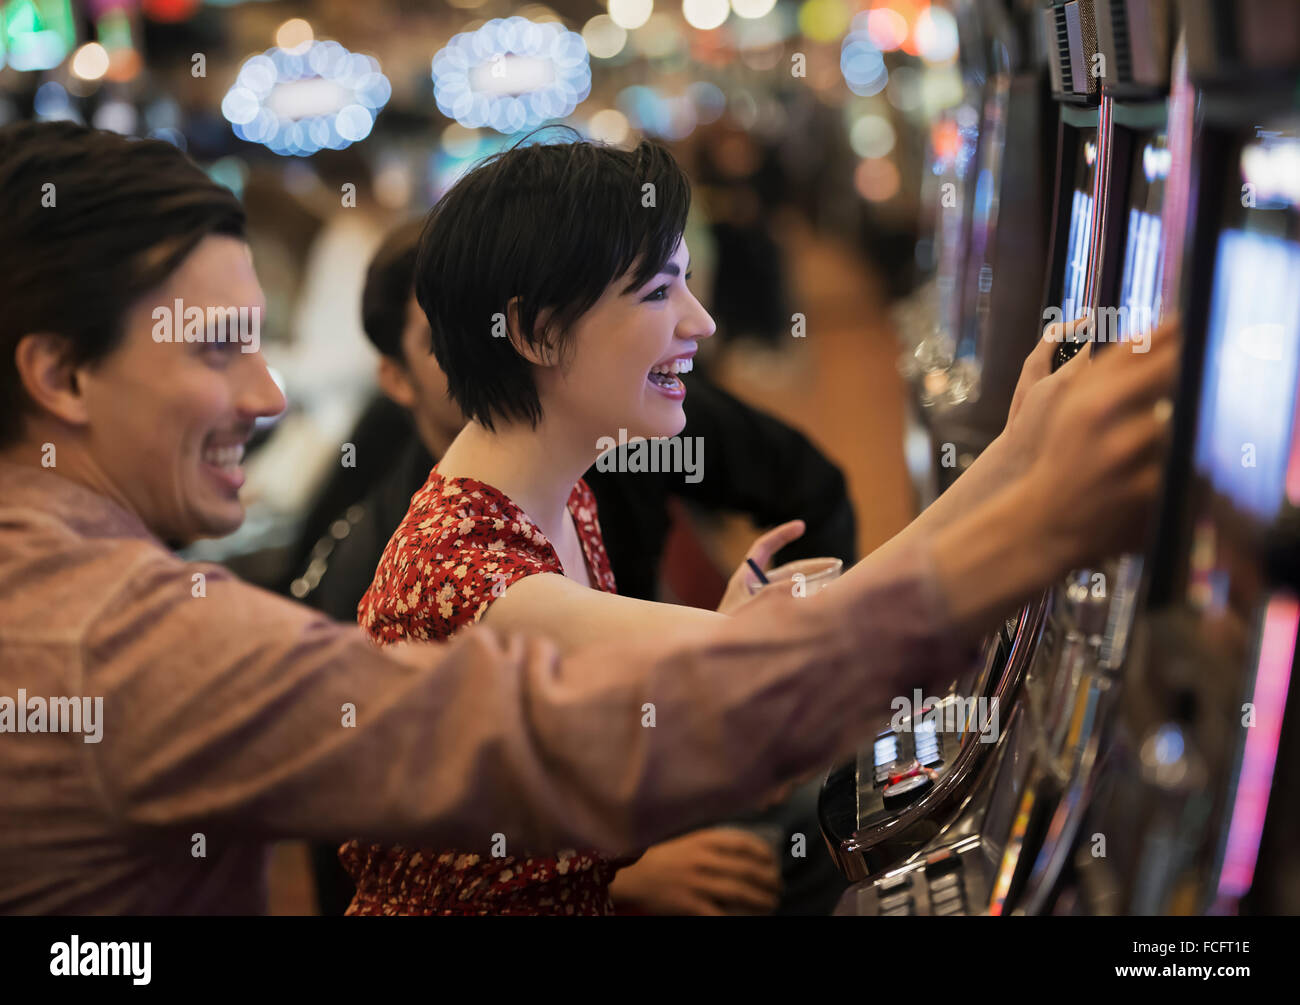 Two people, a young man and woman, playing the slot machines in a casino. Stock Photo